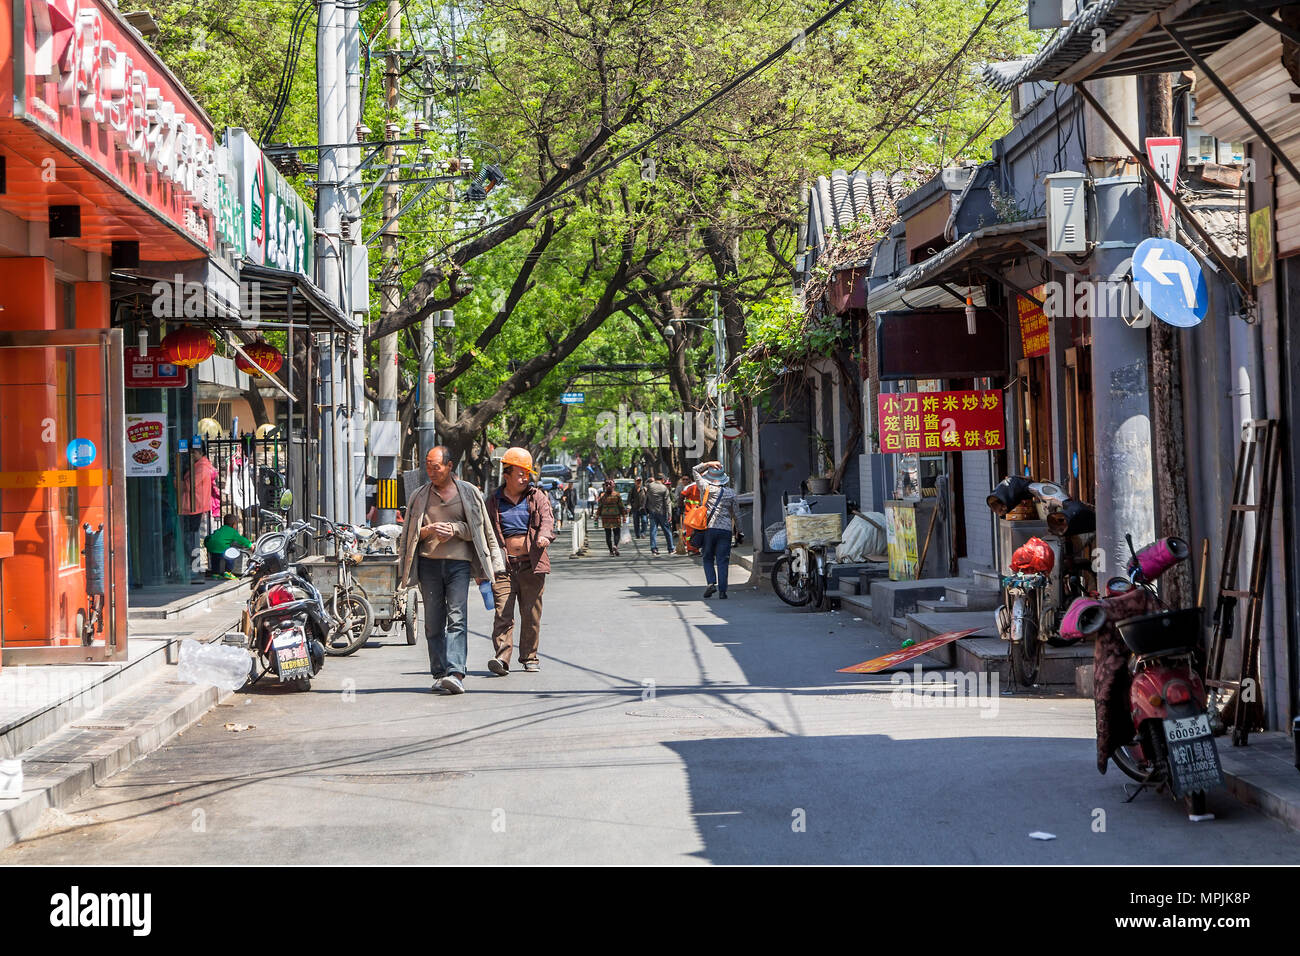 A pair of workmen stroll down a street in Beijing. One exposes his abdomen in order to cool down in the midday heat. Stock Photo